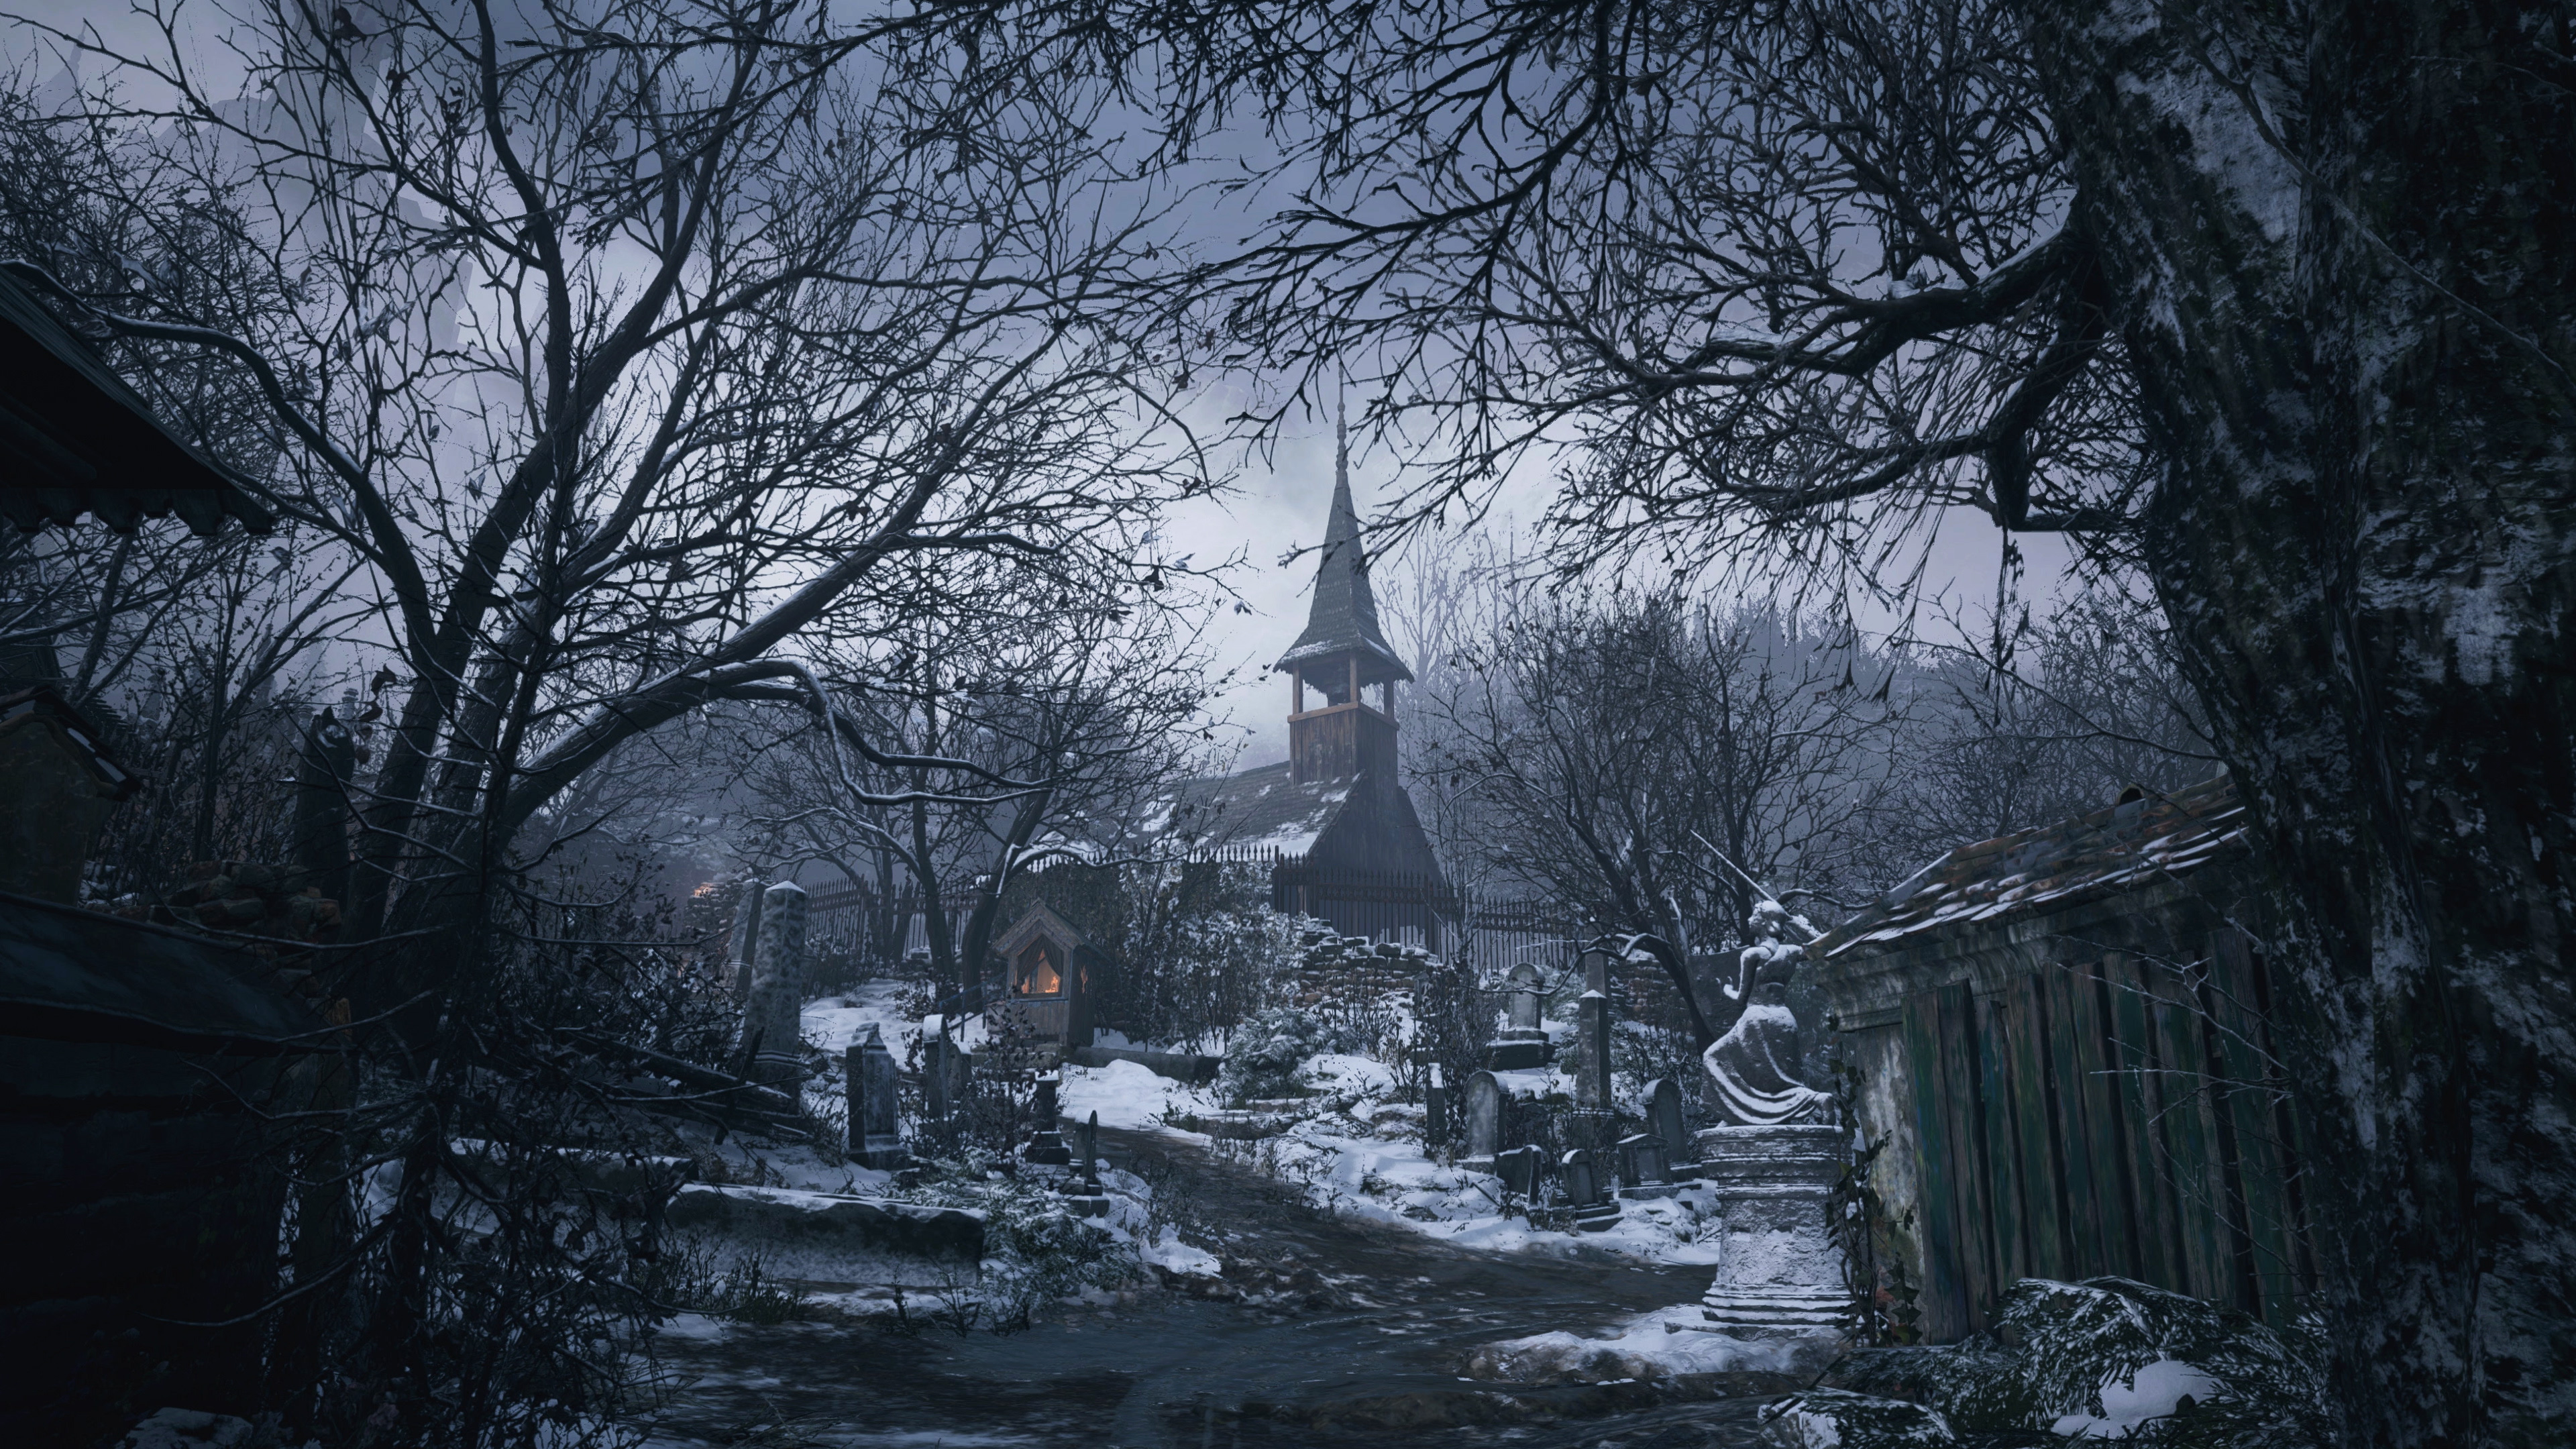 Resident Evil Village's best parts have no connection to Resident